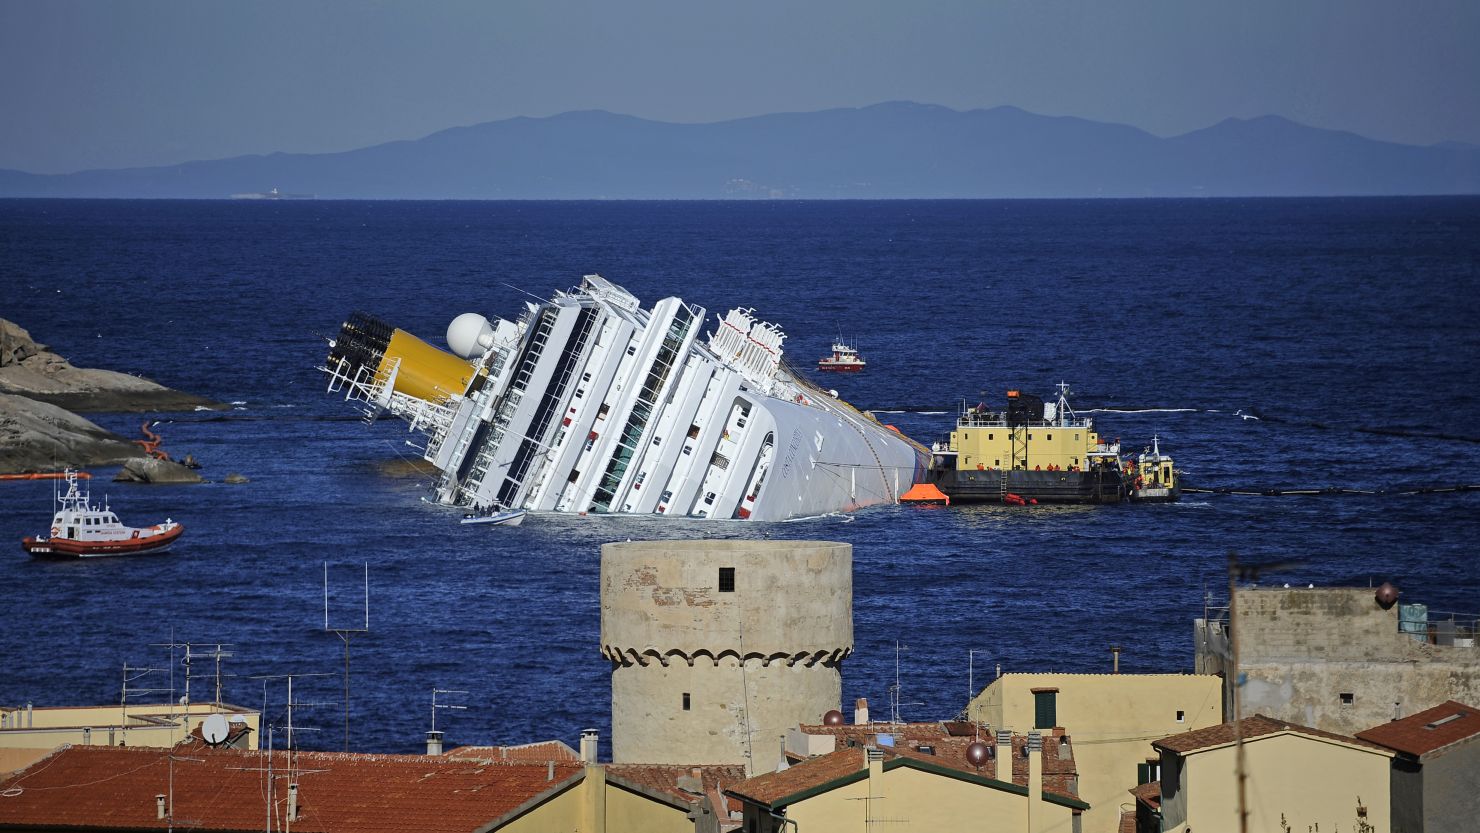 The cruise liner Costa Concordia, seen on January 25, hit rocks and sank off the coast of Italy's Giglio Island. 